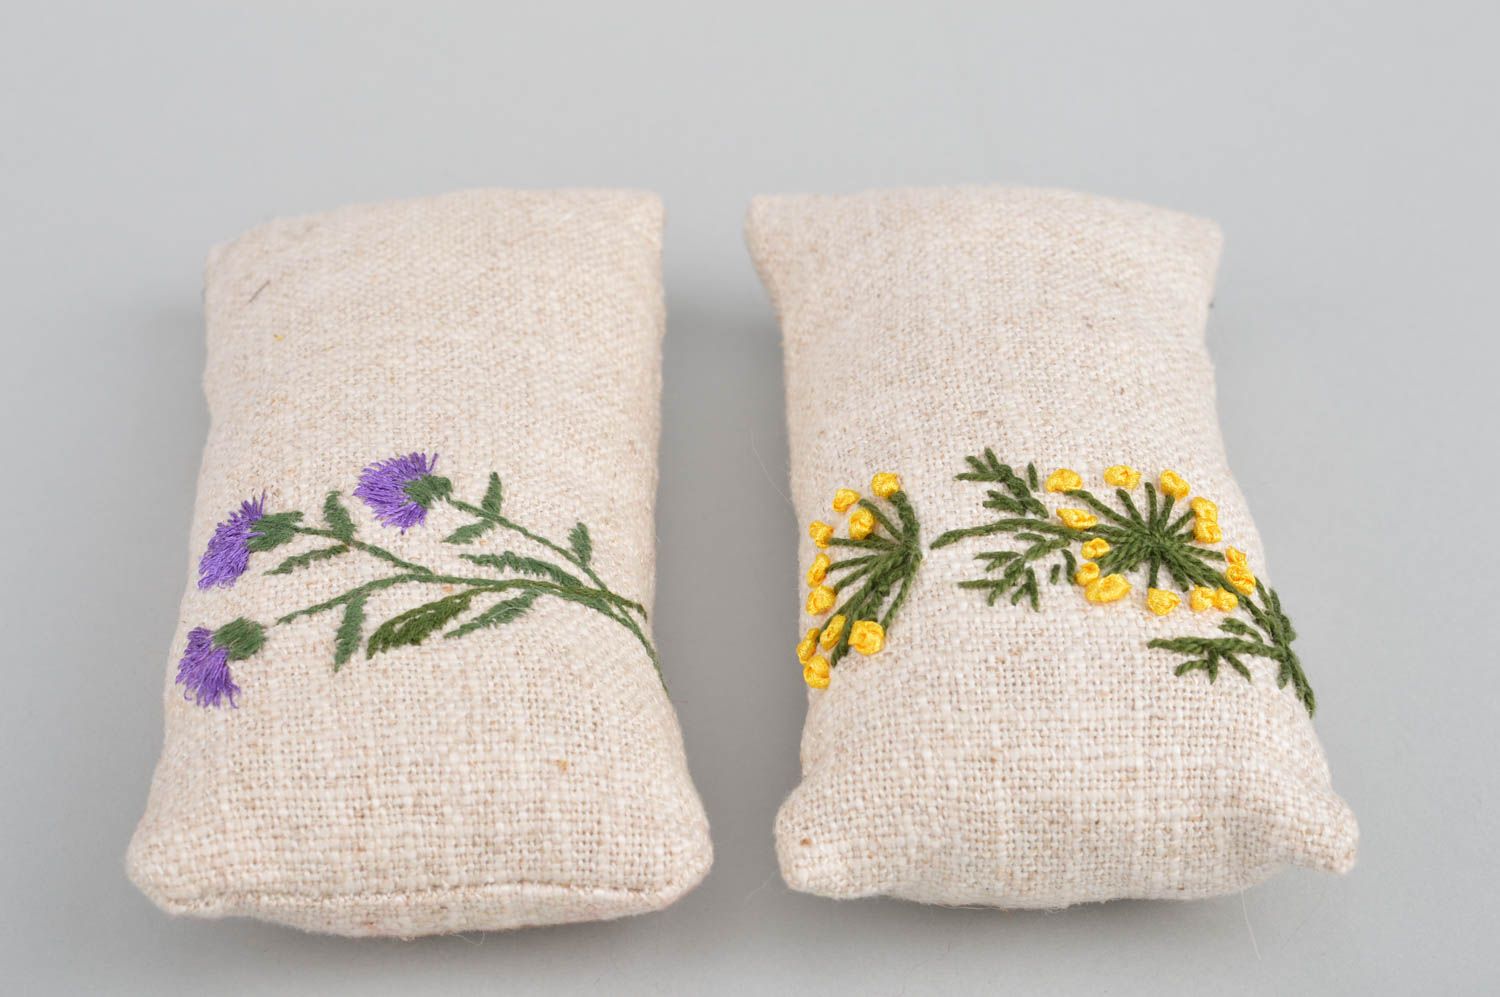 Handmade designer soft interior embroidered sachet pillows with herbs for home photo 5